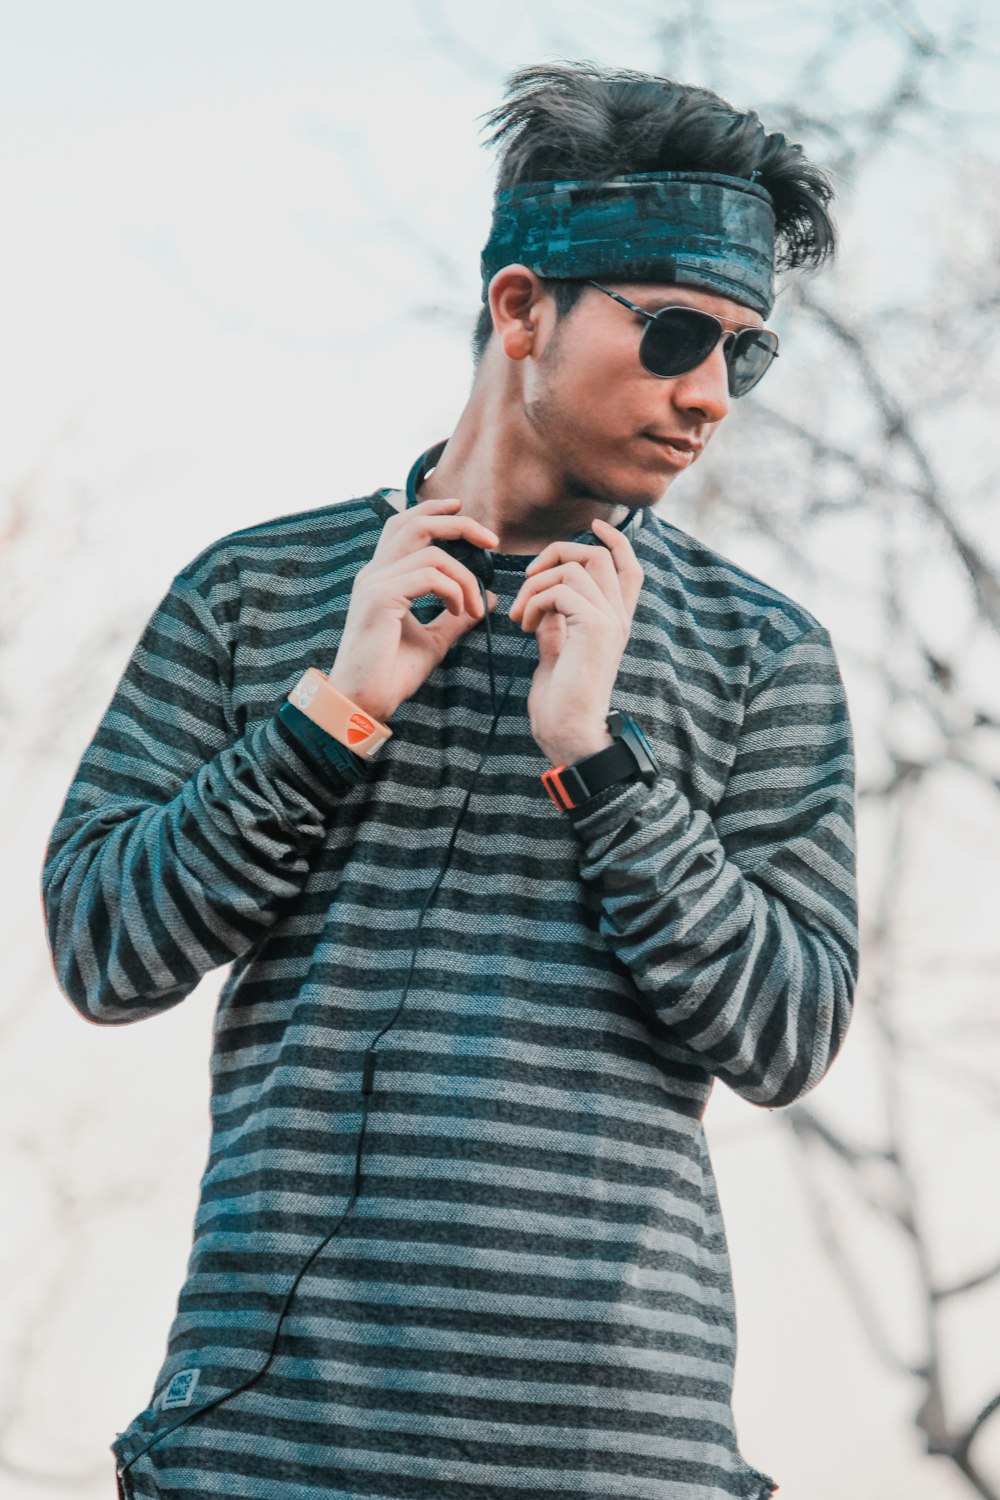 1000+ Stylish Boy Pictures | Download Free Images on Unsplash